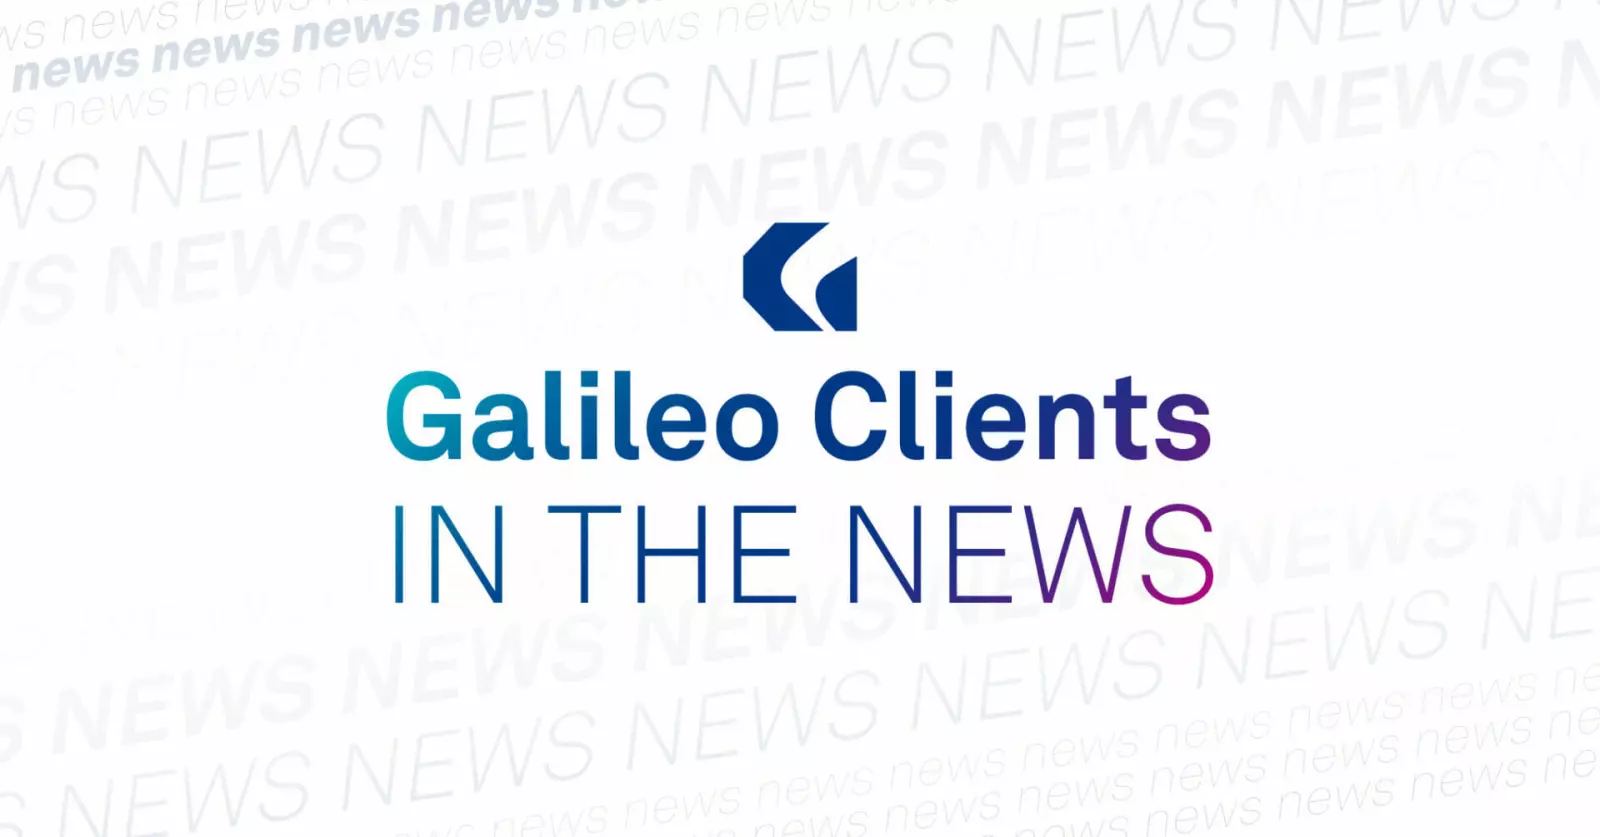 The year is off to an exciting start for Galileo clients! From fundraising to expansions, these innovative fintechs, neobanks and providers from around the world are making strides in their journeys to expand the financial frontier.